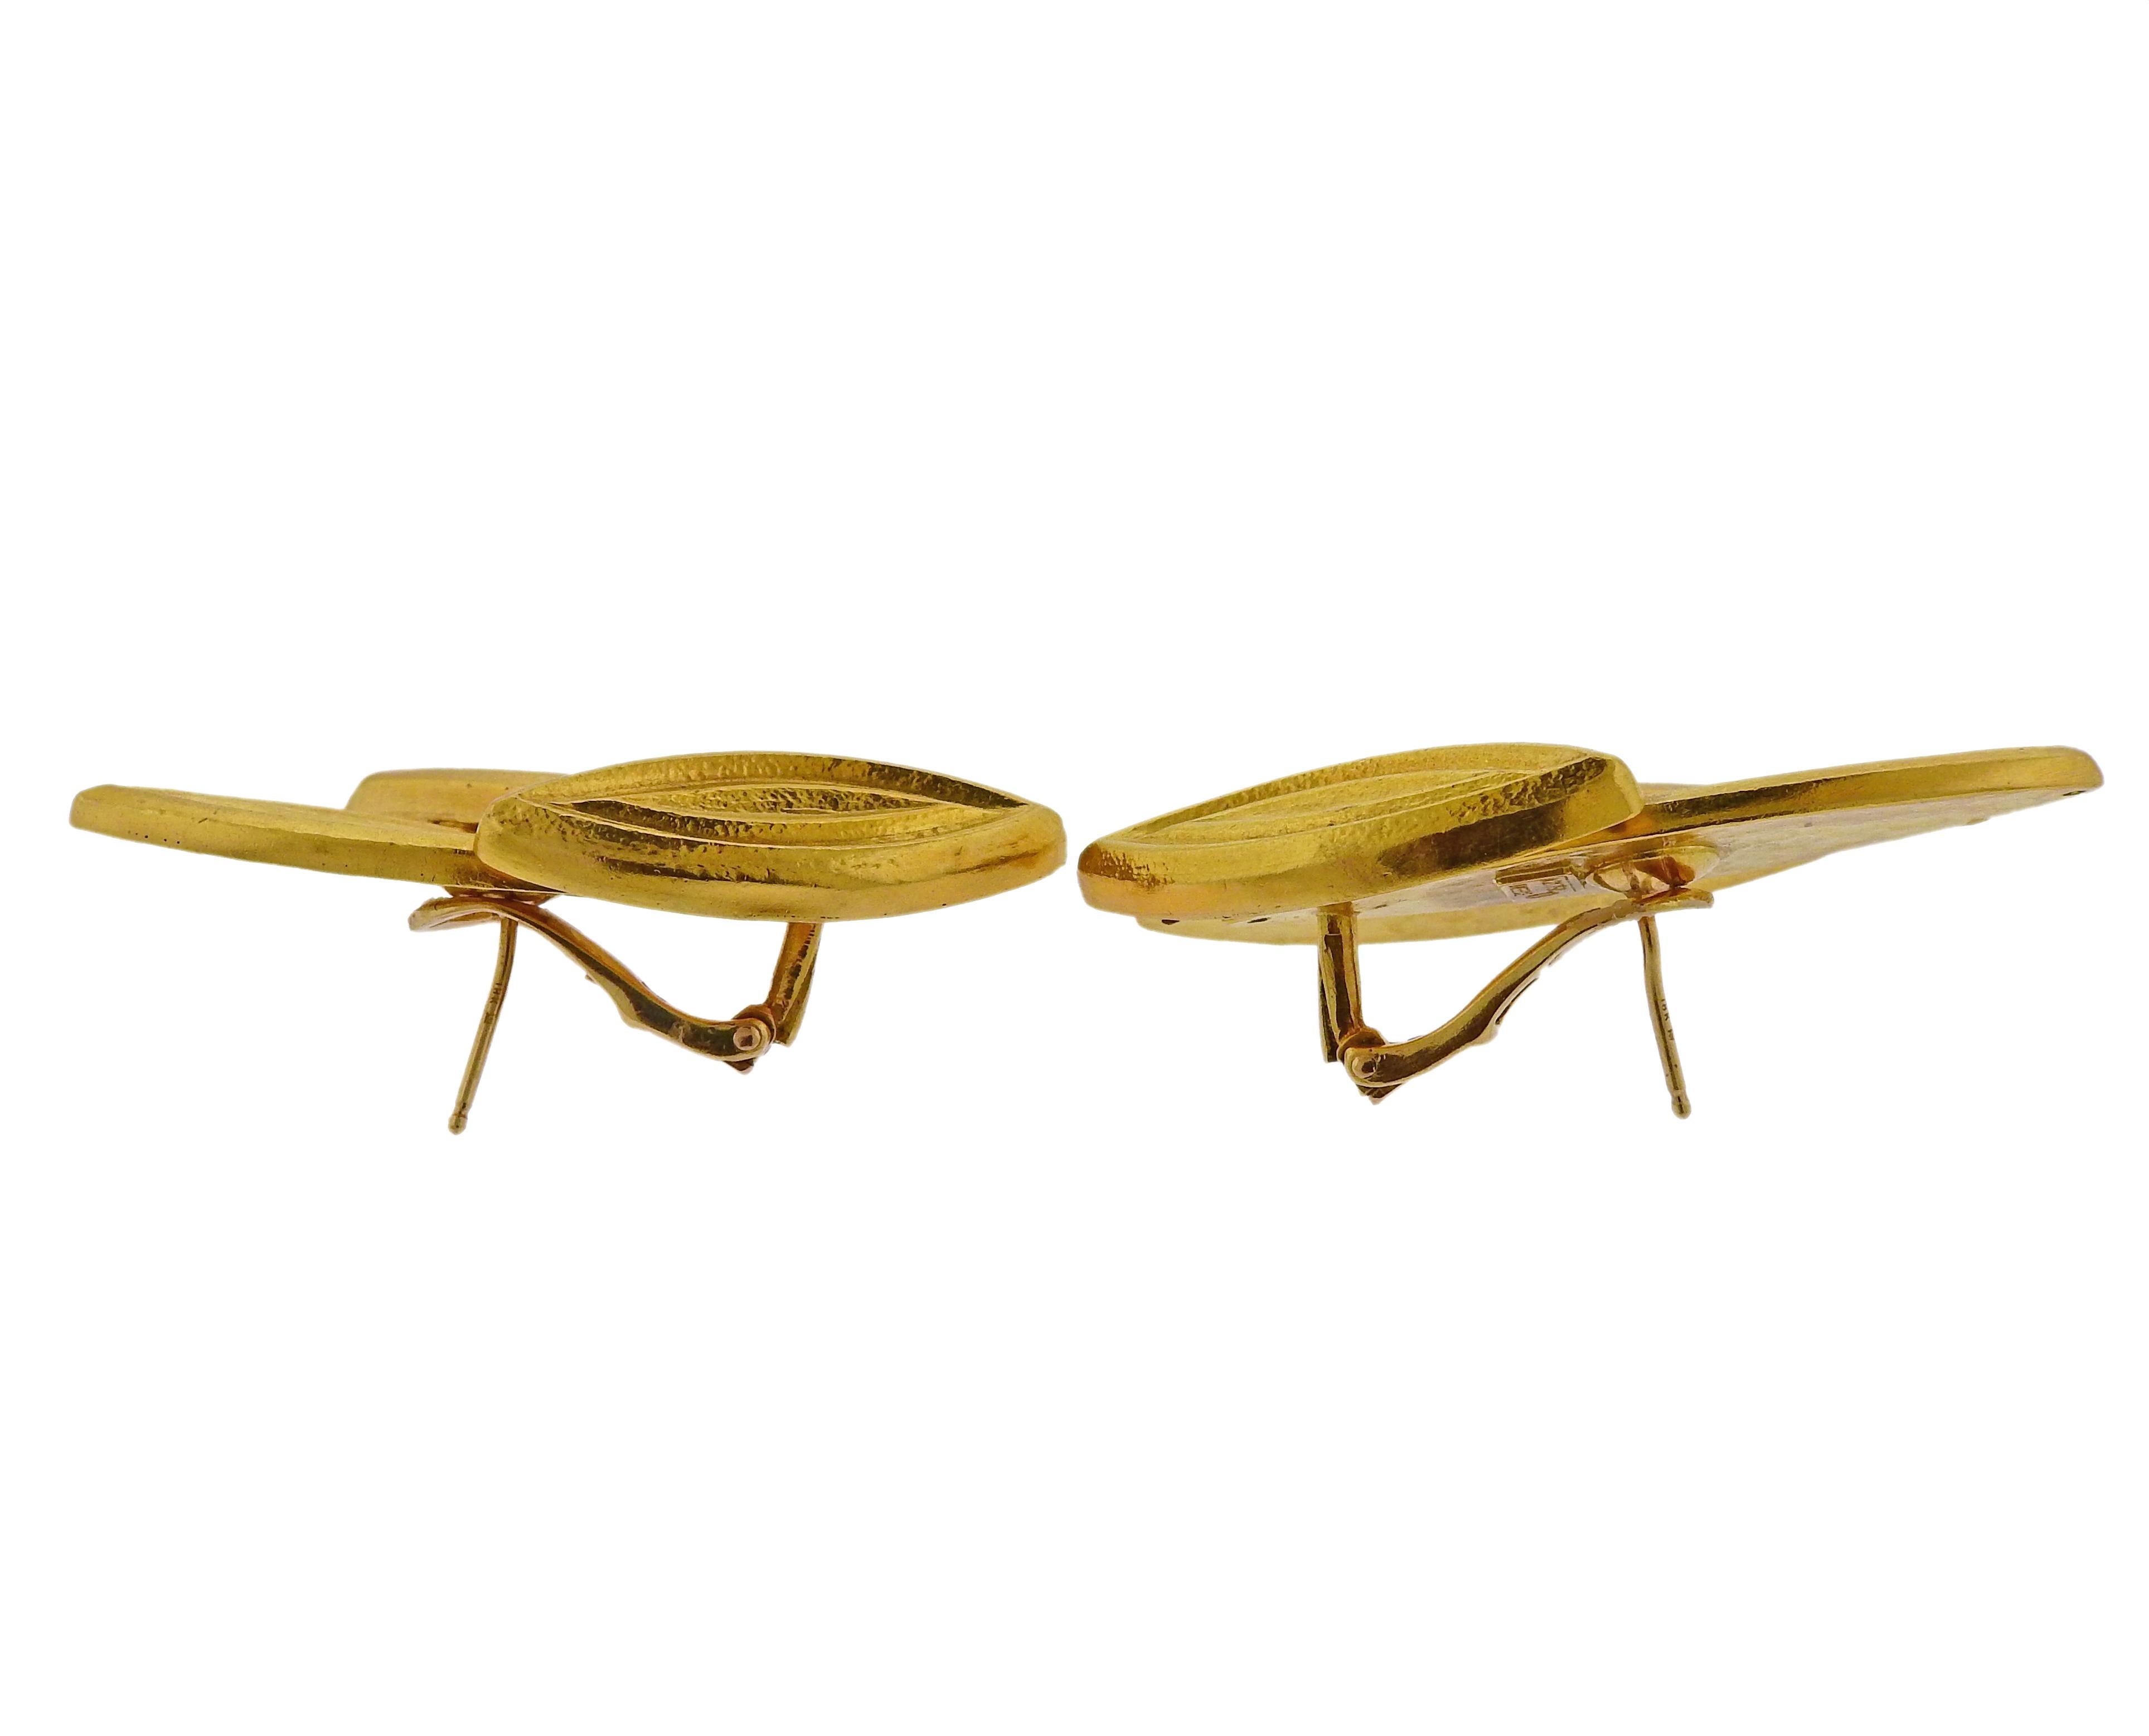 Pair of 18k yellow gold leaf motif earrings, crafted by Greek designer Ilias Lalaounis. Earrings measurements are 46mm x 25mm. Weight is 29.3 grams. Marked: A21, Greece, 750, Maker's mark. 